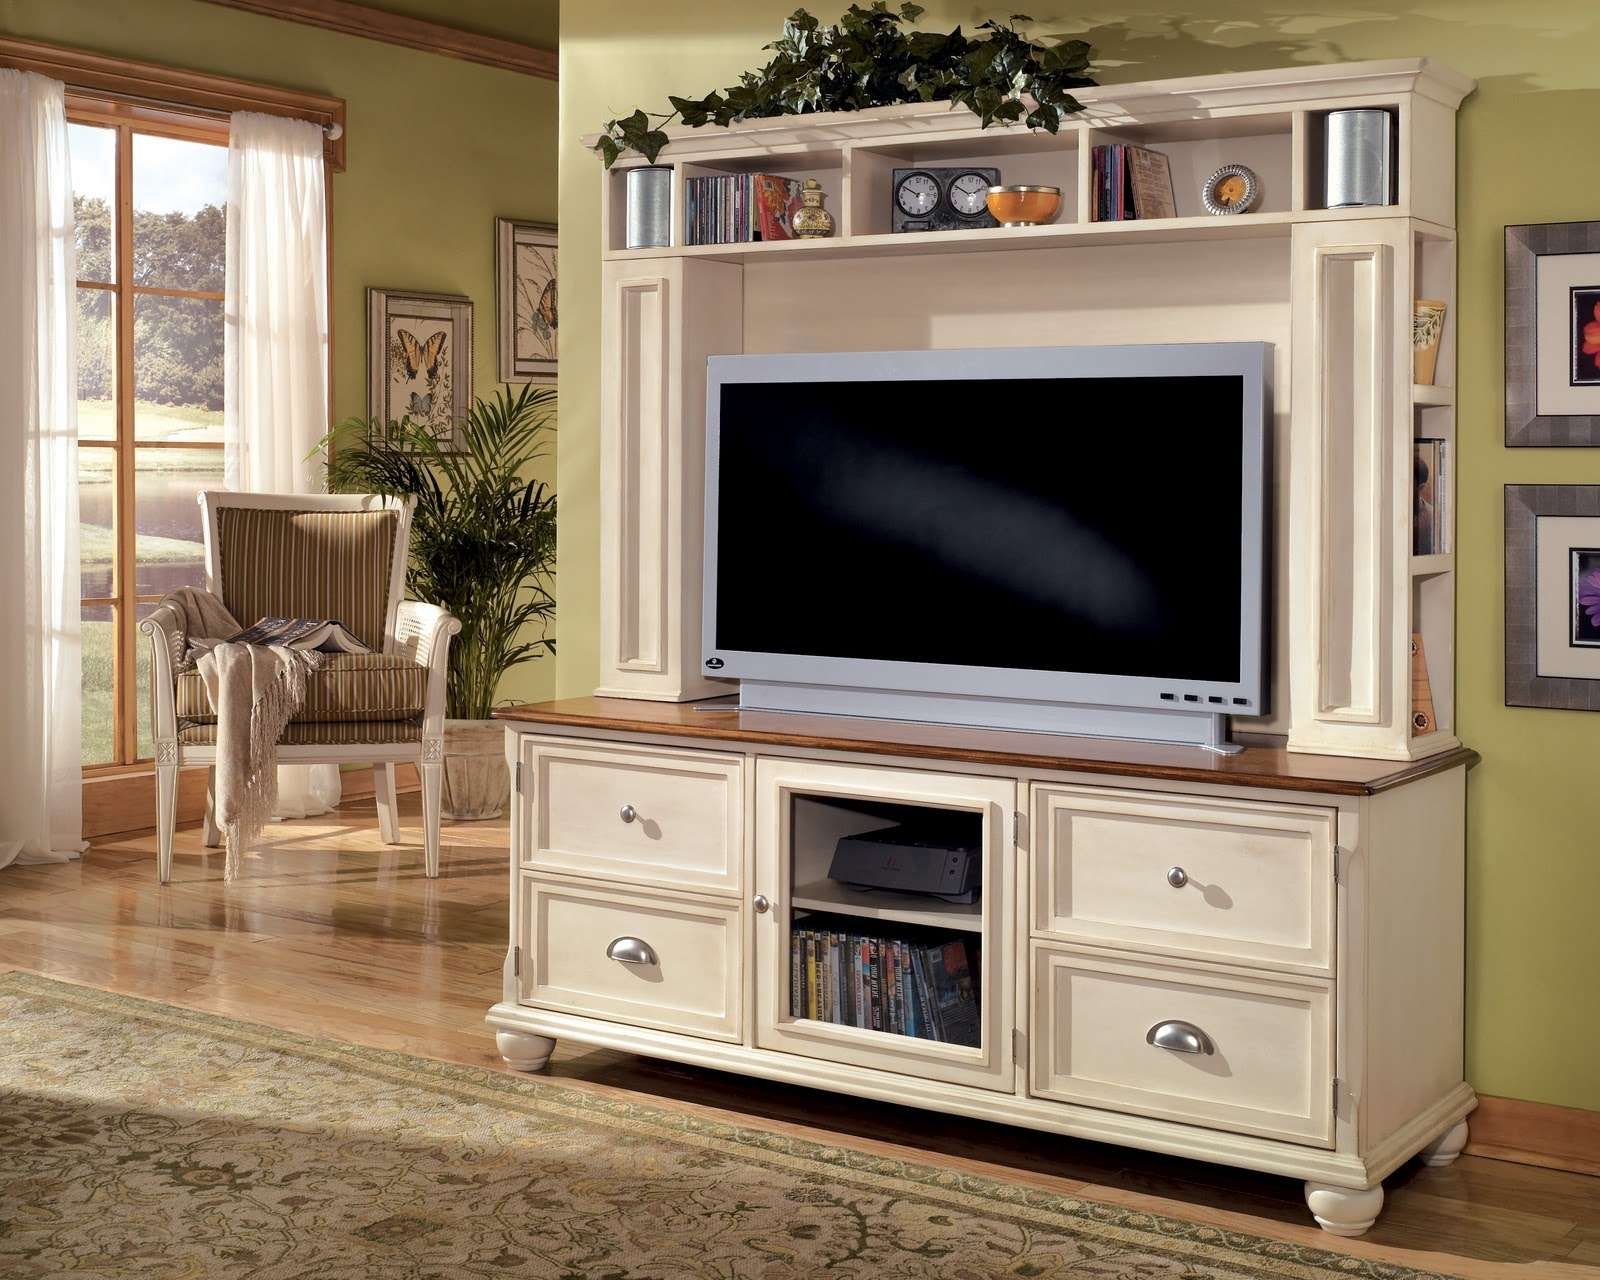 Furniture. White Wood French Country Style Big Screen Tv Stand Pertaining To Country Style Tv Cabinets (Gallery 3 of 20)